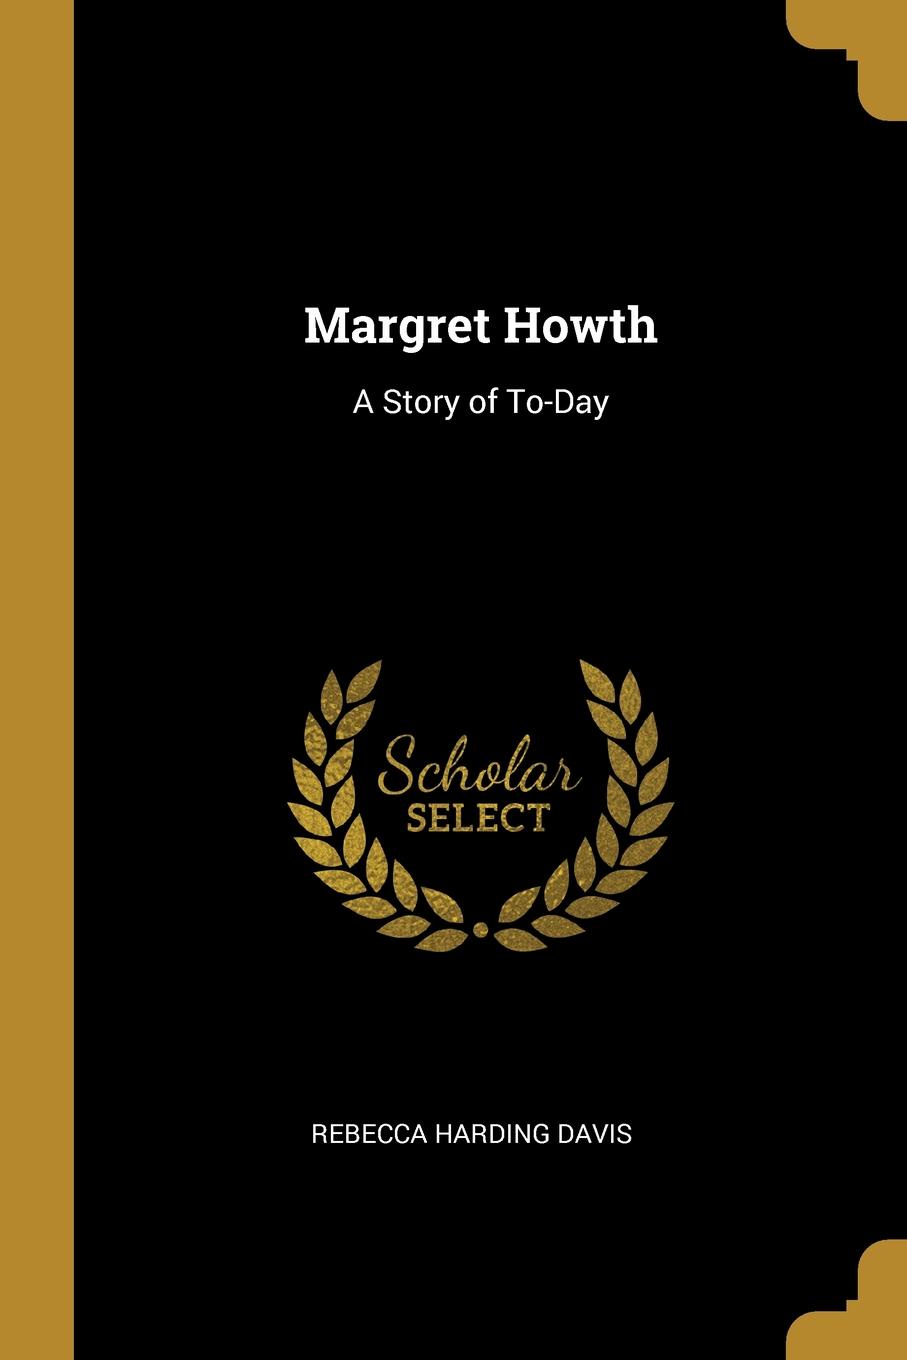 Margret Howth. A Story of To-Day